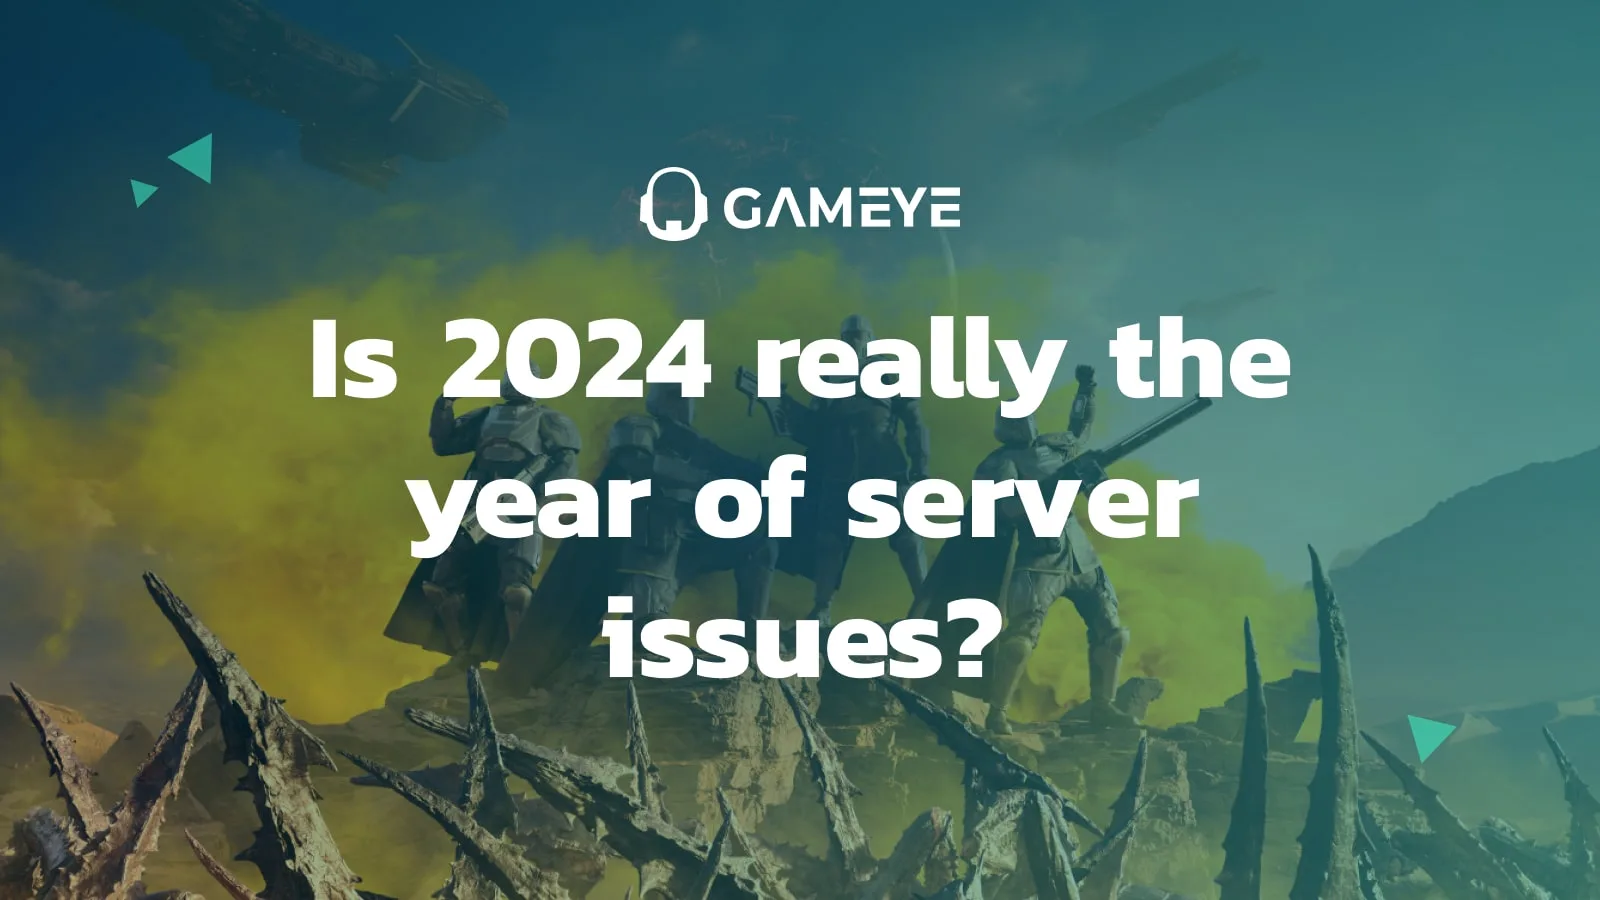 Is 2024 really the year of server issues?